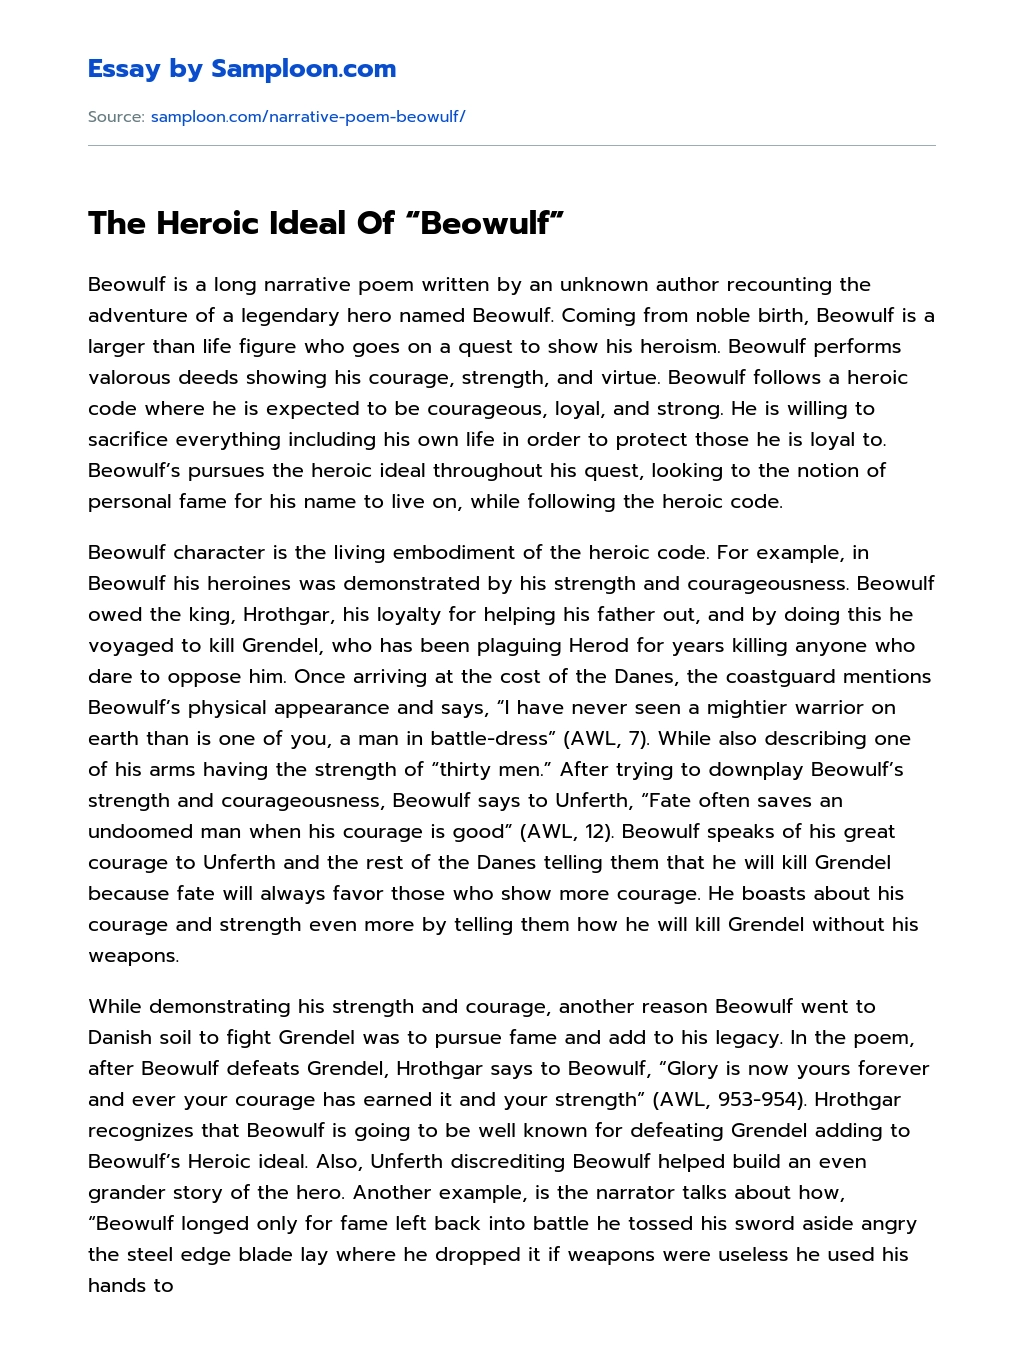 The Heroic Ideal Of “Beowulf” Analytical Essay essay